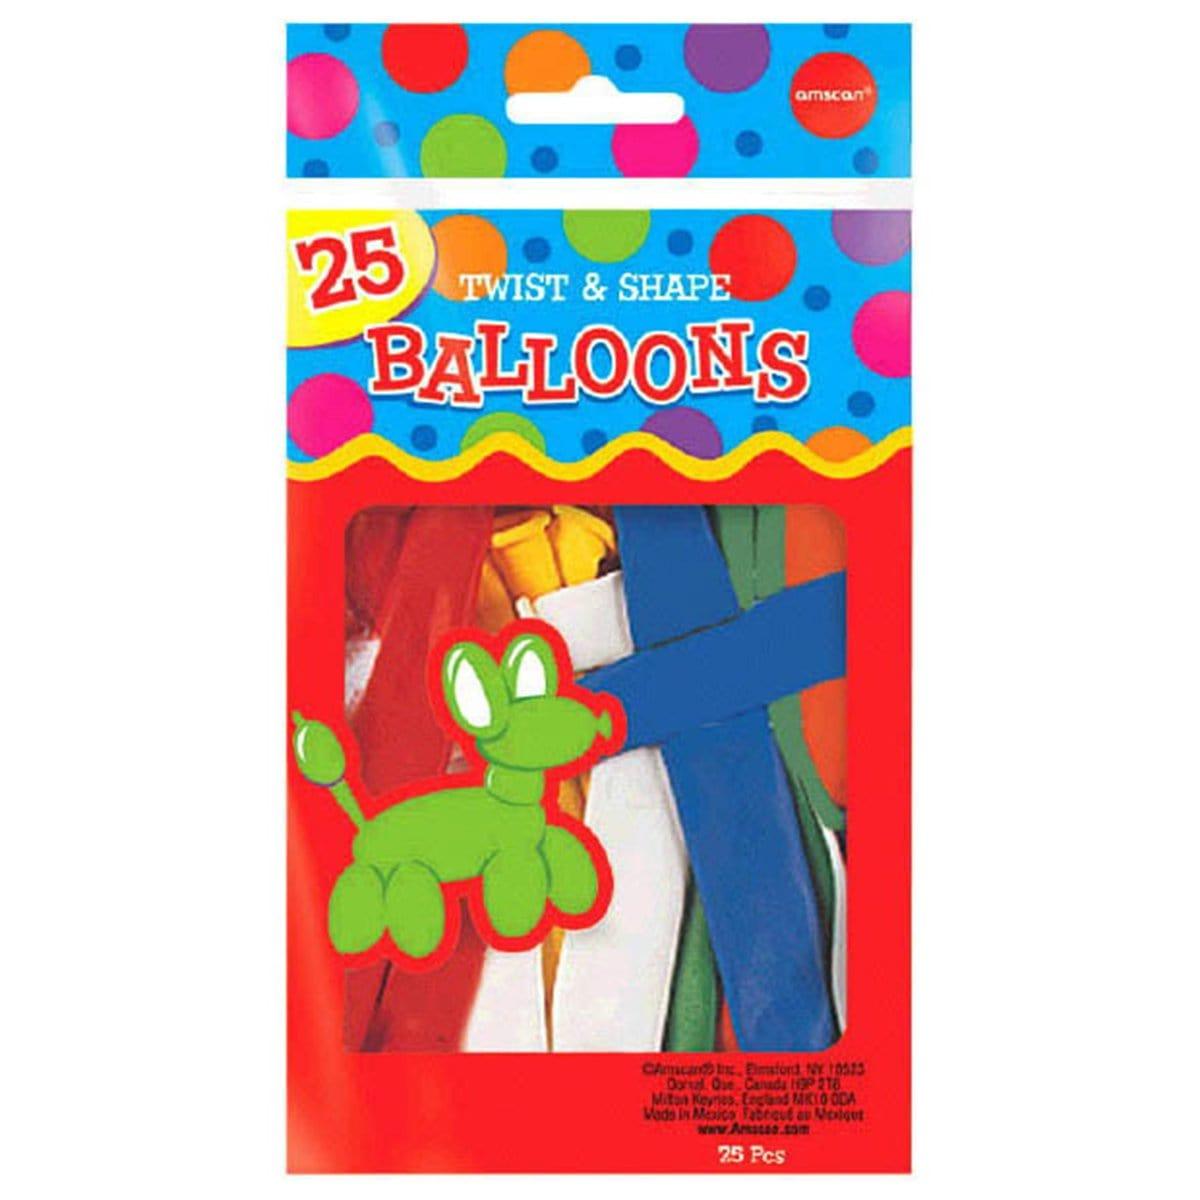 Buy Balloons Twist And Shape Latex Balloon Mix, 25 Count sold at Party Expert